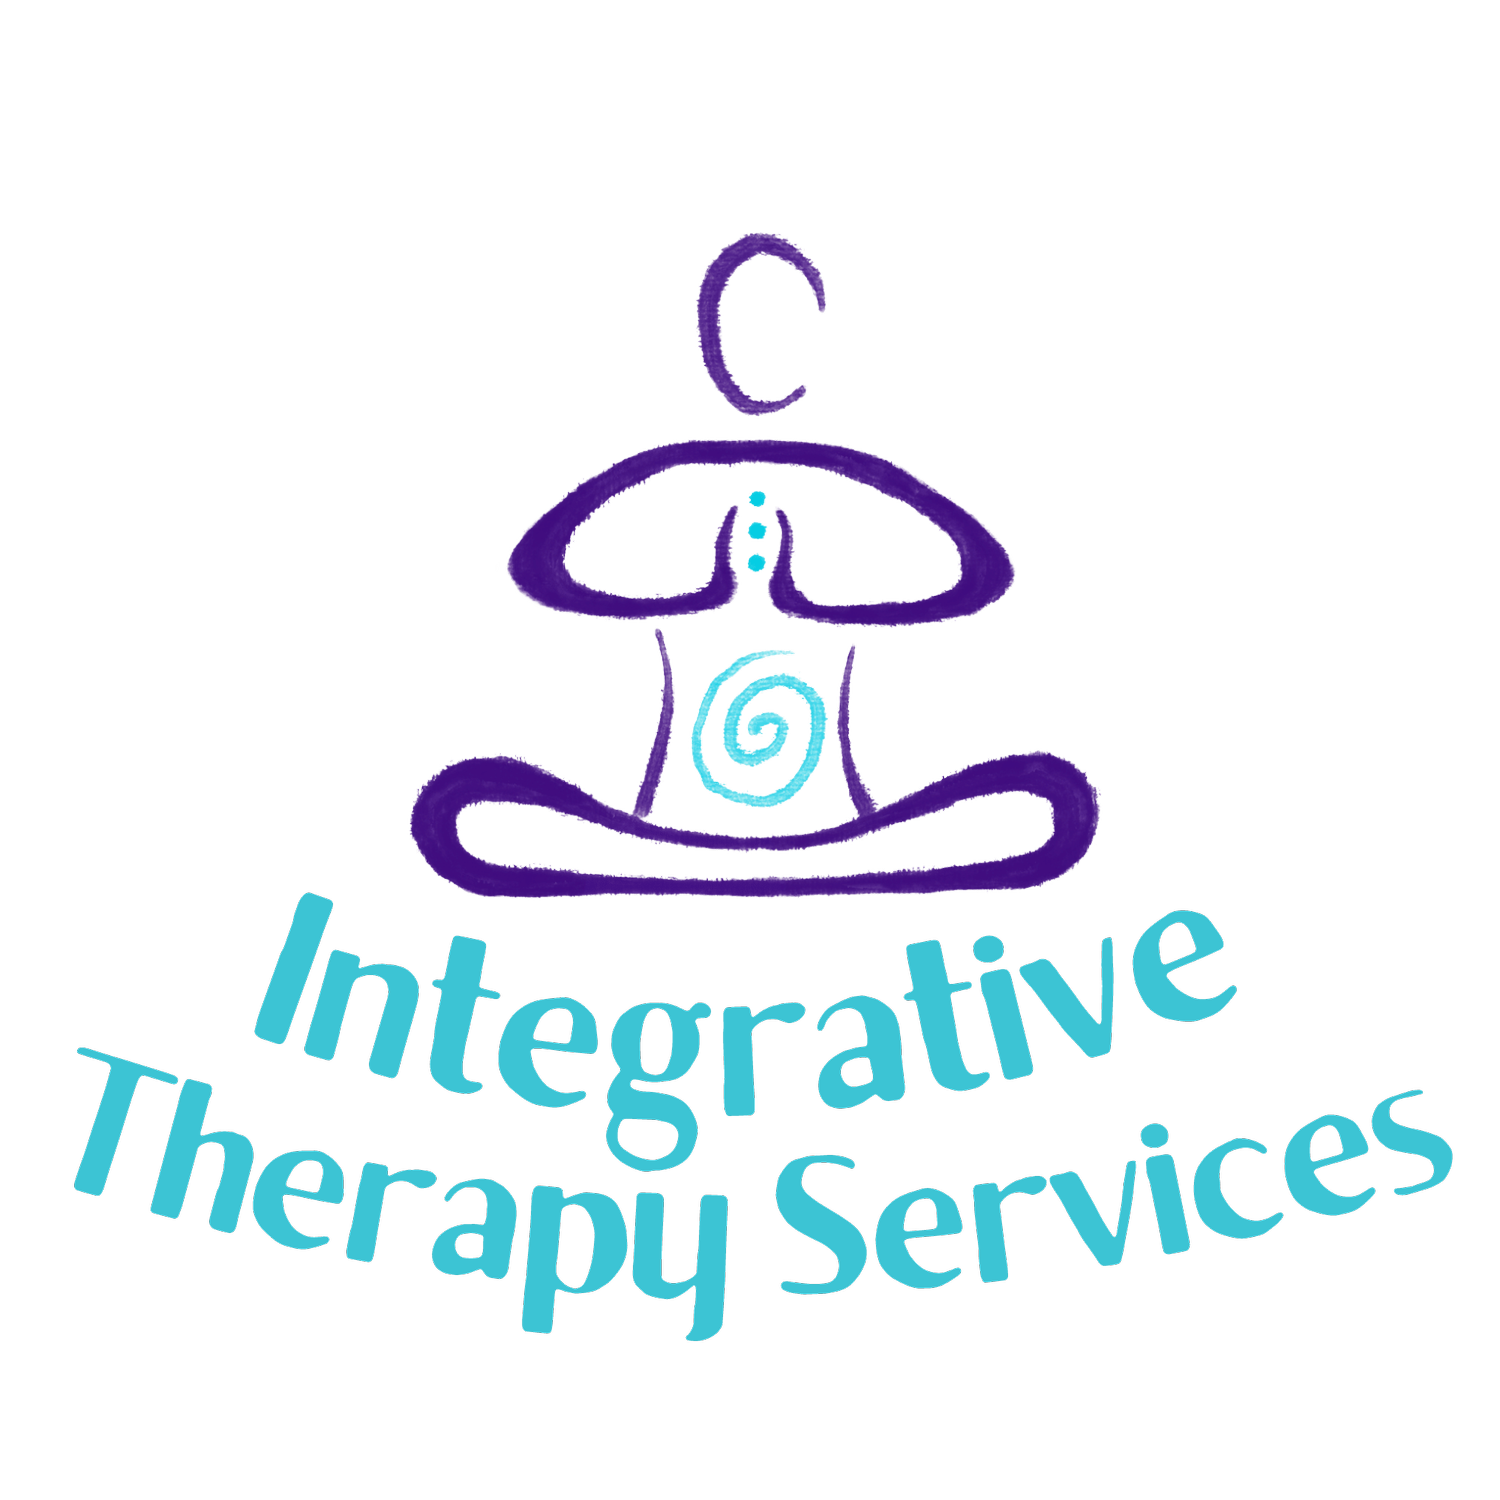 Integrative Therapy Services